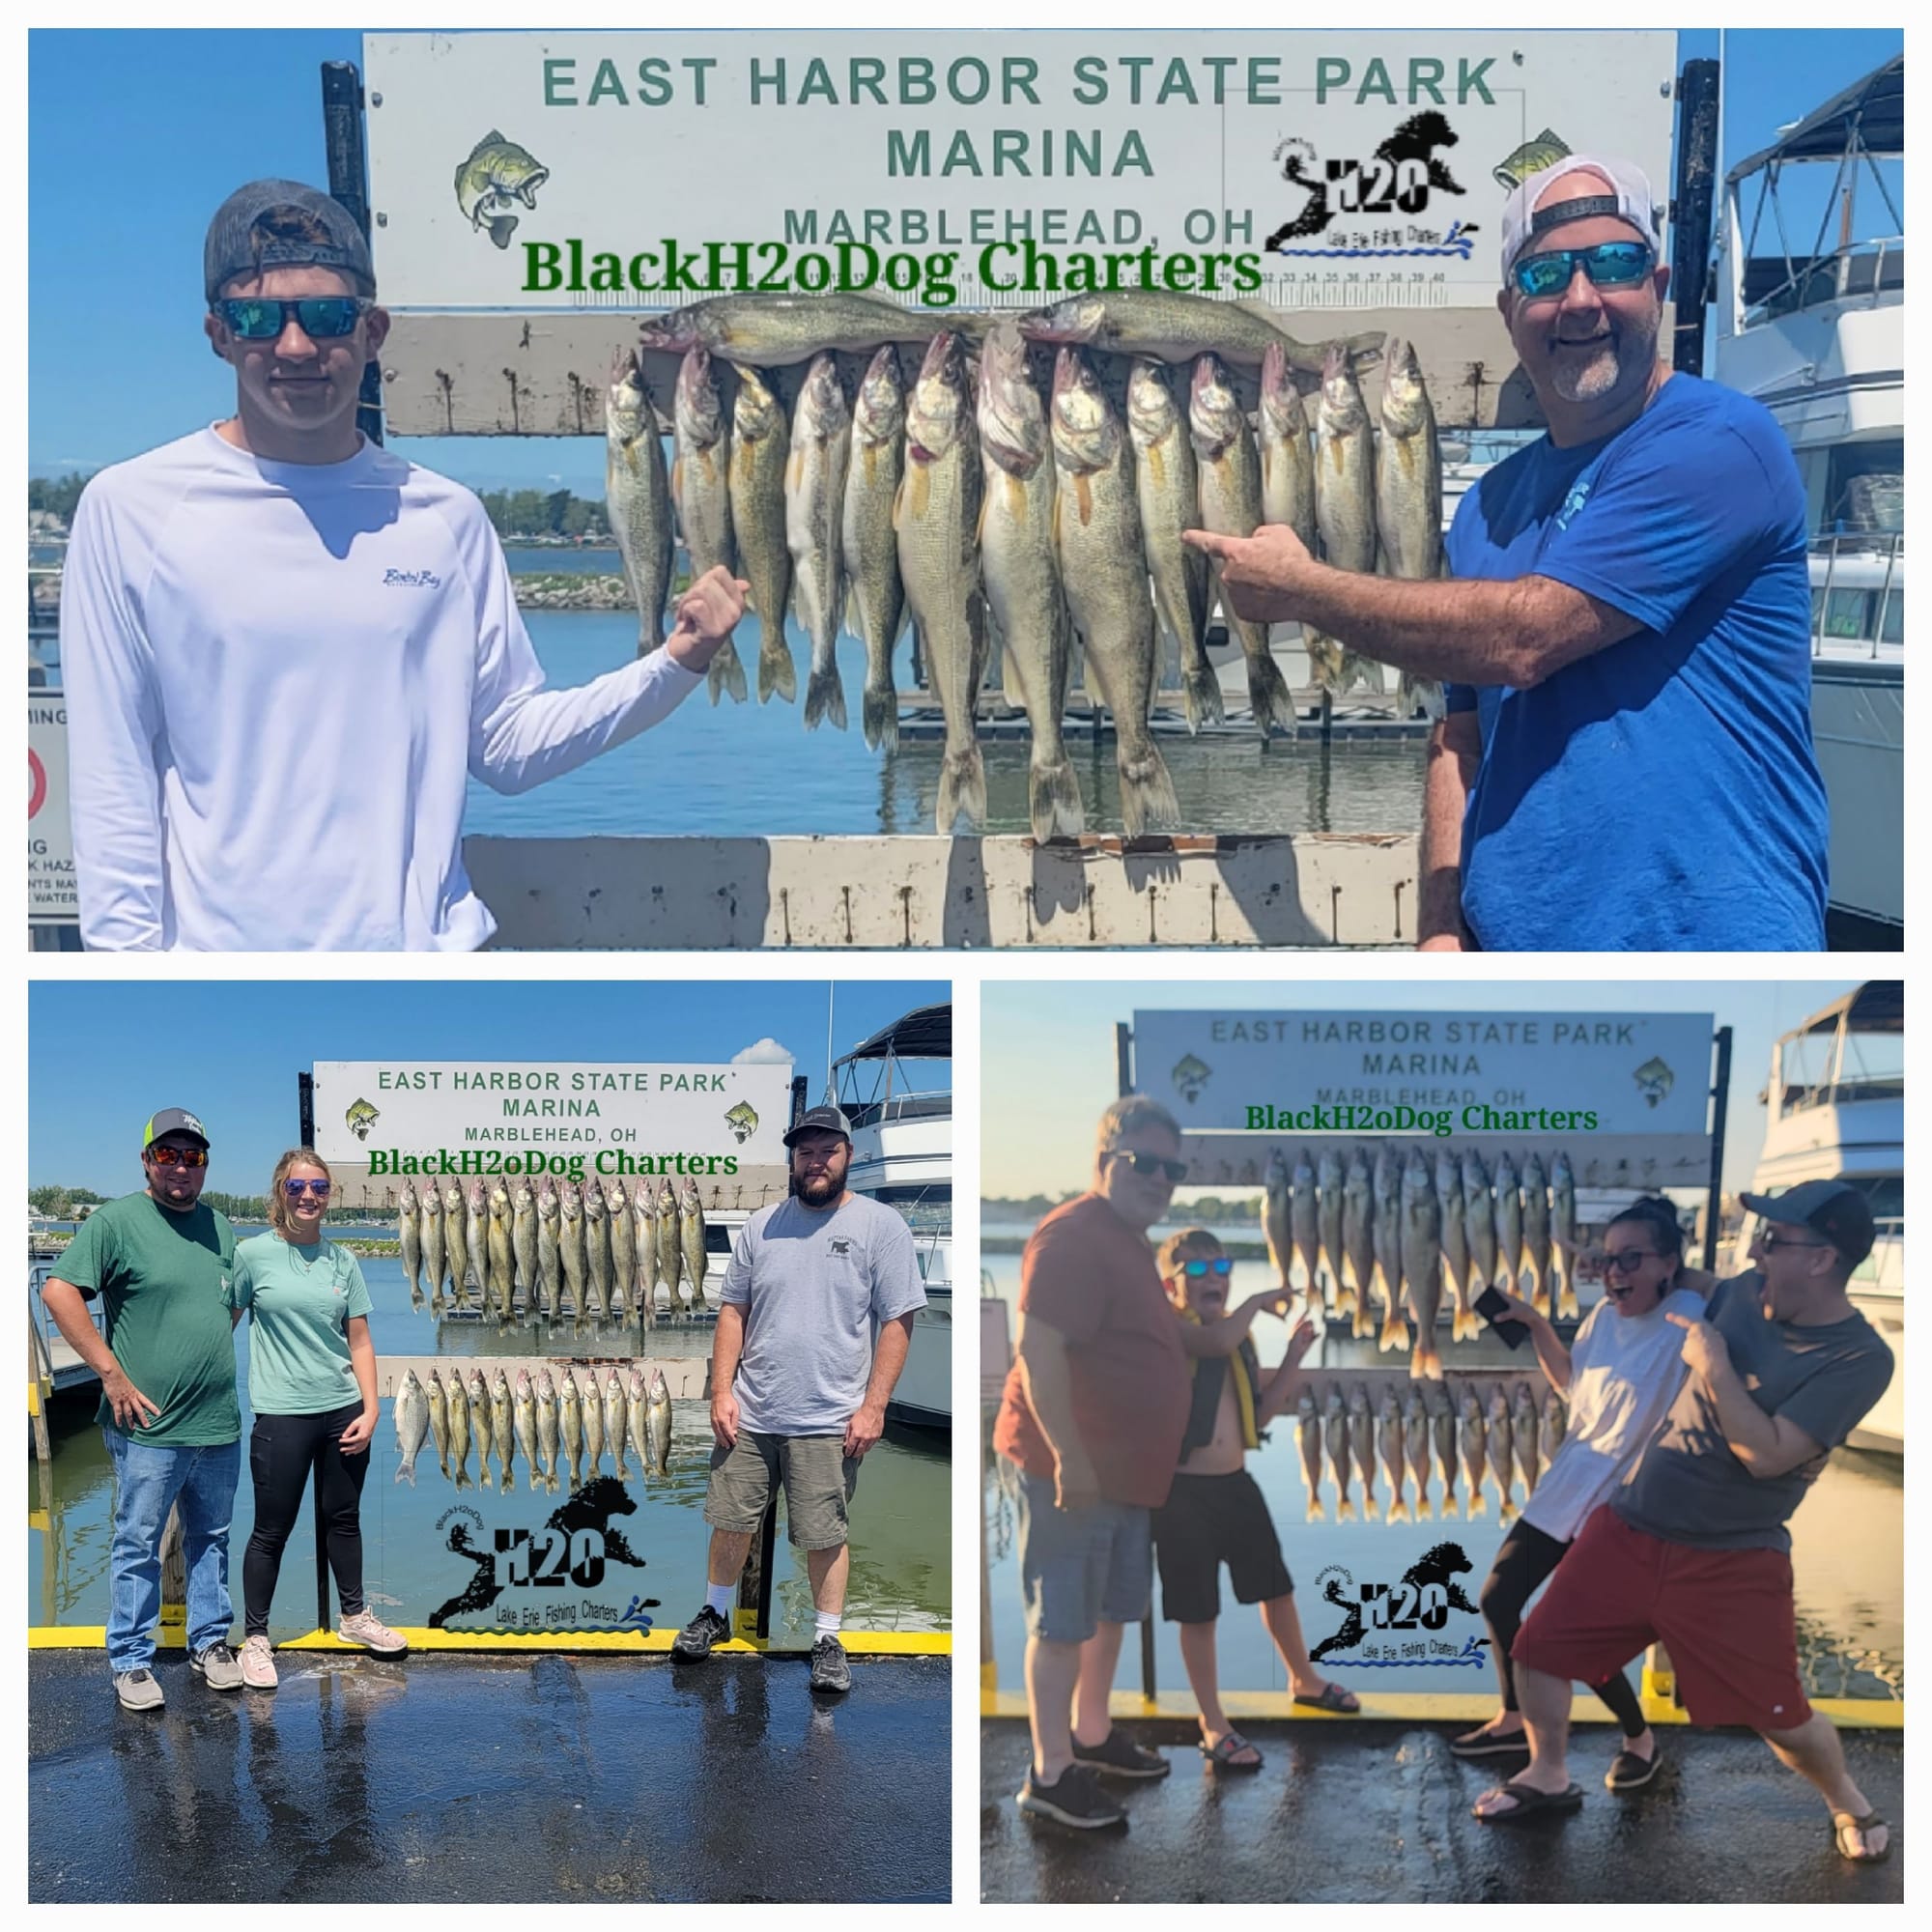 Western Lake Erie fishing report. - Page 122 - The Hull Truth - Boating and  Fishing Forum